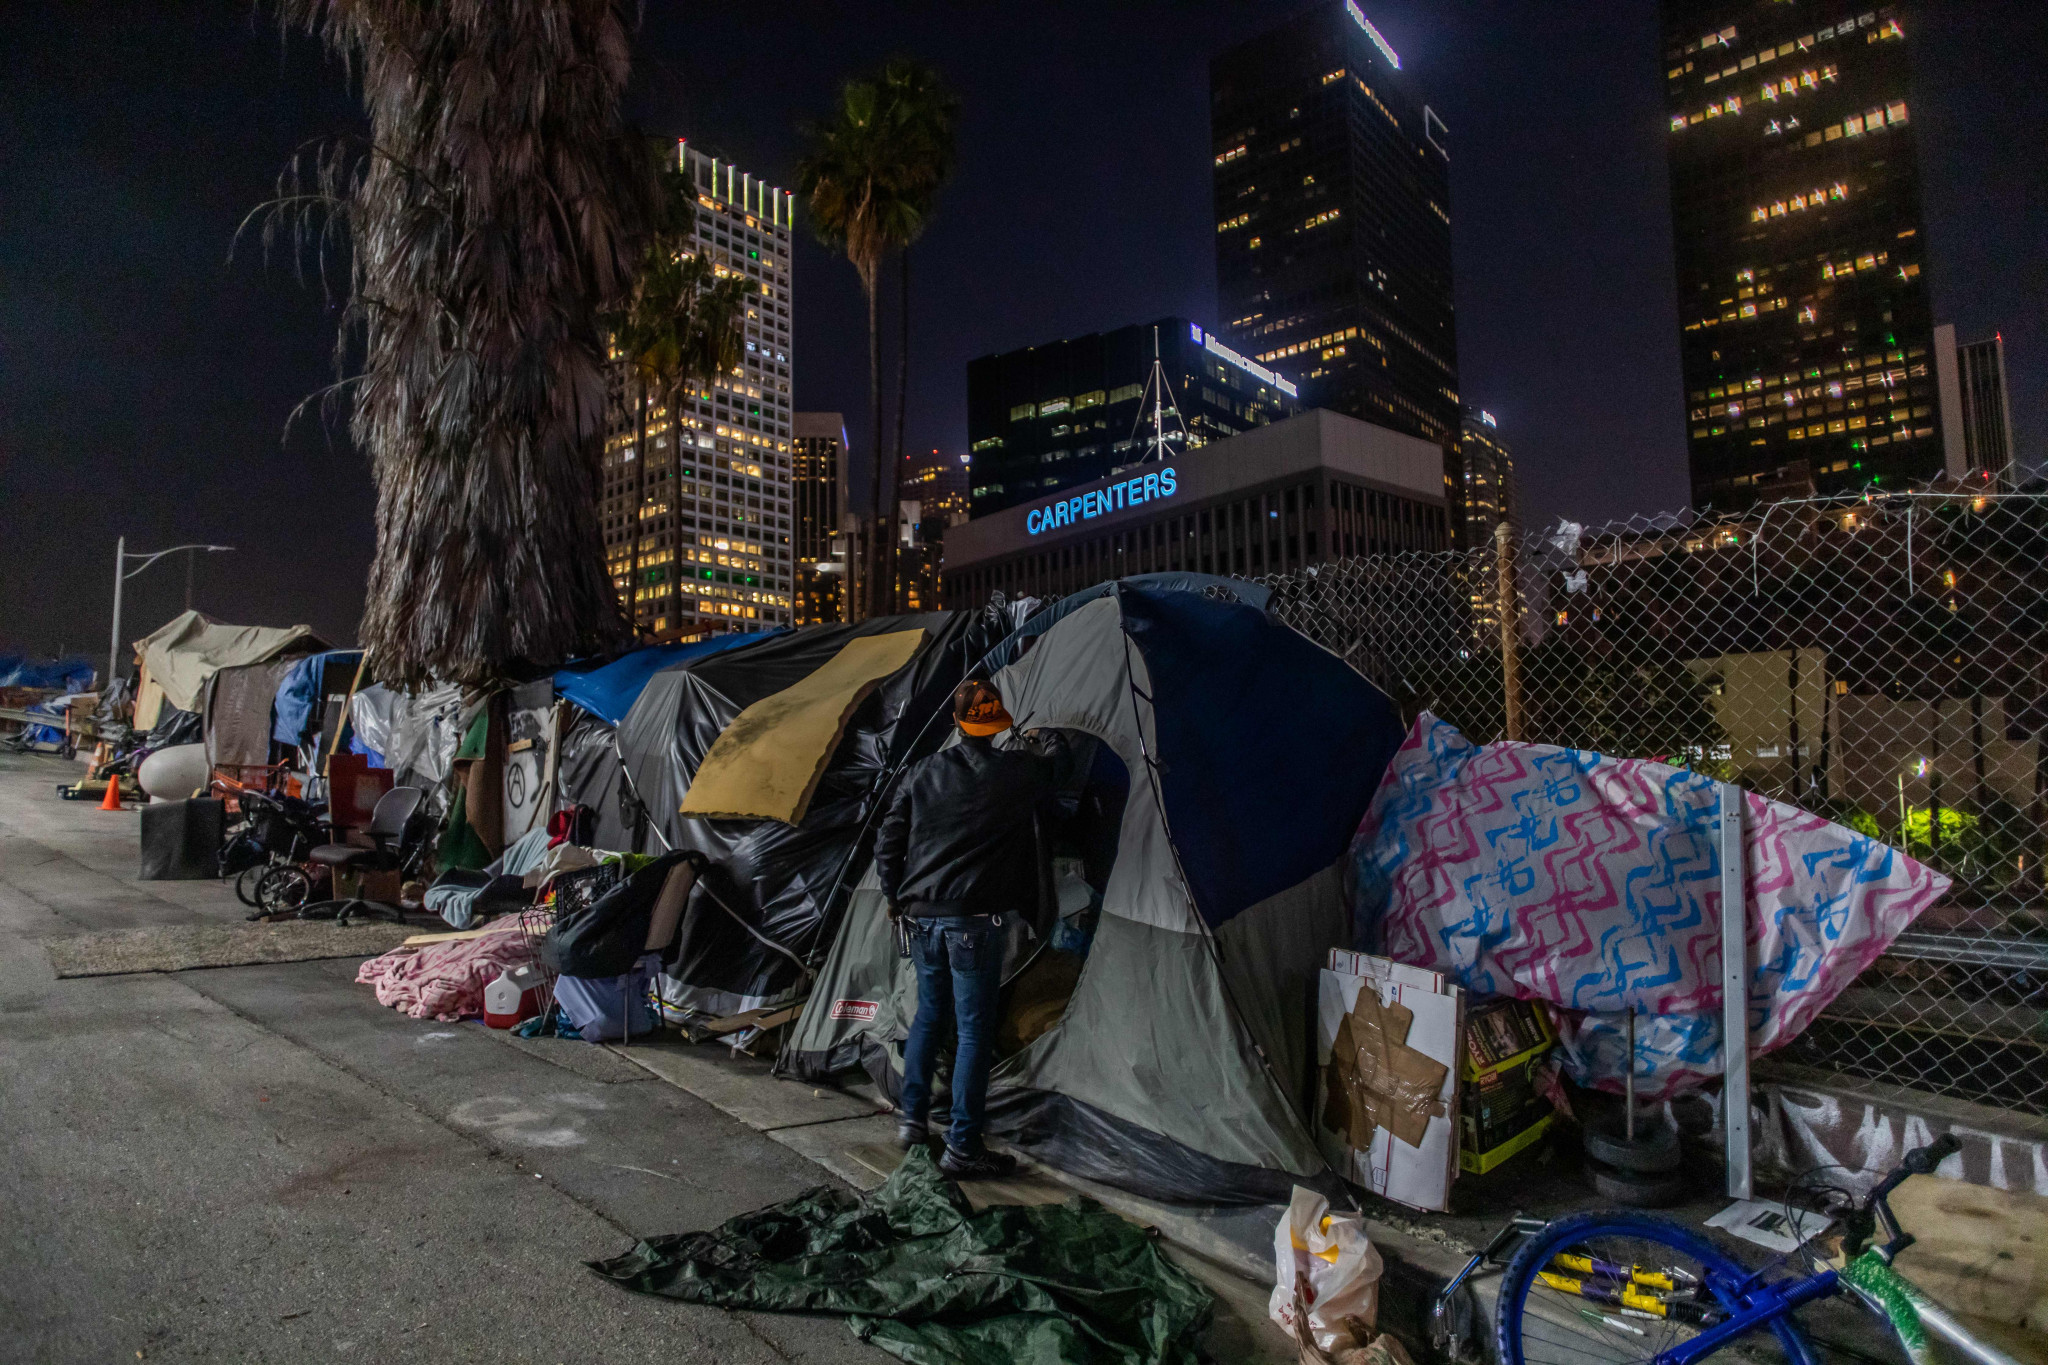 It is estimated that 60,000 people a night are homeless in Los Angeles ©Getty Images